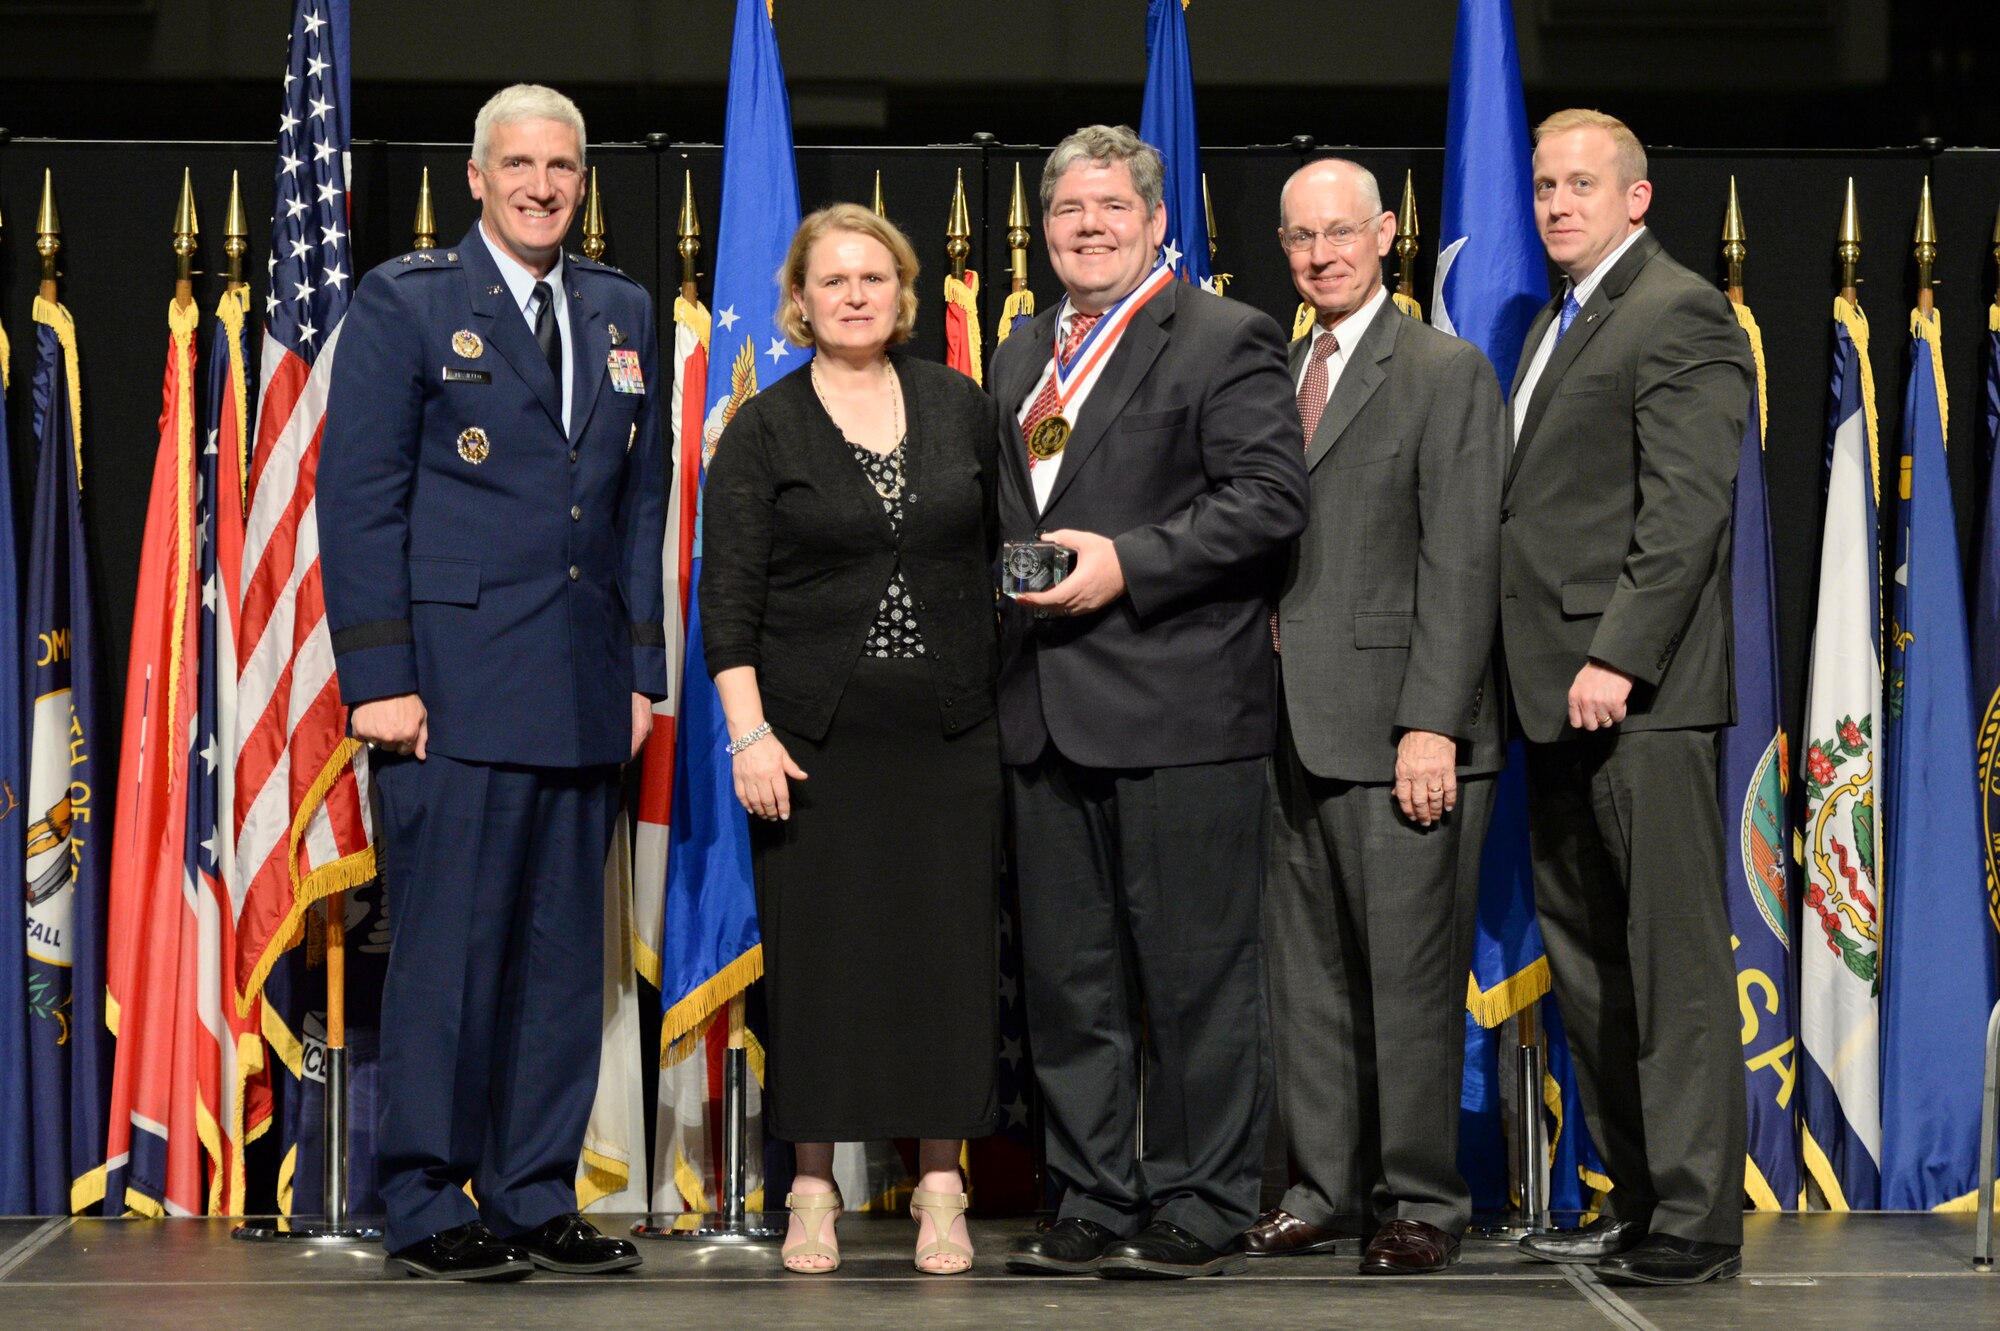 Dr. Kevin Priddy, chief, Avionics Engineering Division, Air Force Life Cycle Management Center, and his wife Wendy, are honored during the 2014 Air Force Research Laboratory Fellows and Early Career Awards Banquet Oct. 30 at the National Museum of the U.S. Air Force. Joining them are Maj. Gen Tom Masiello, AFRL commander, retired Maj. Gen. Dick Paul, AFRL's first commander, and Dr. Morley Stone, AFRL chief technology officer.  (U.S. Air Force photo/Wesley Farnsworth)